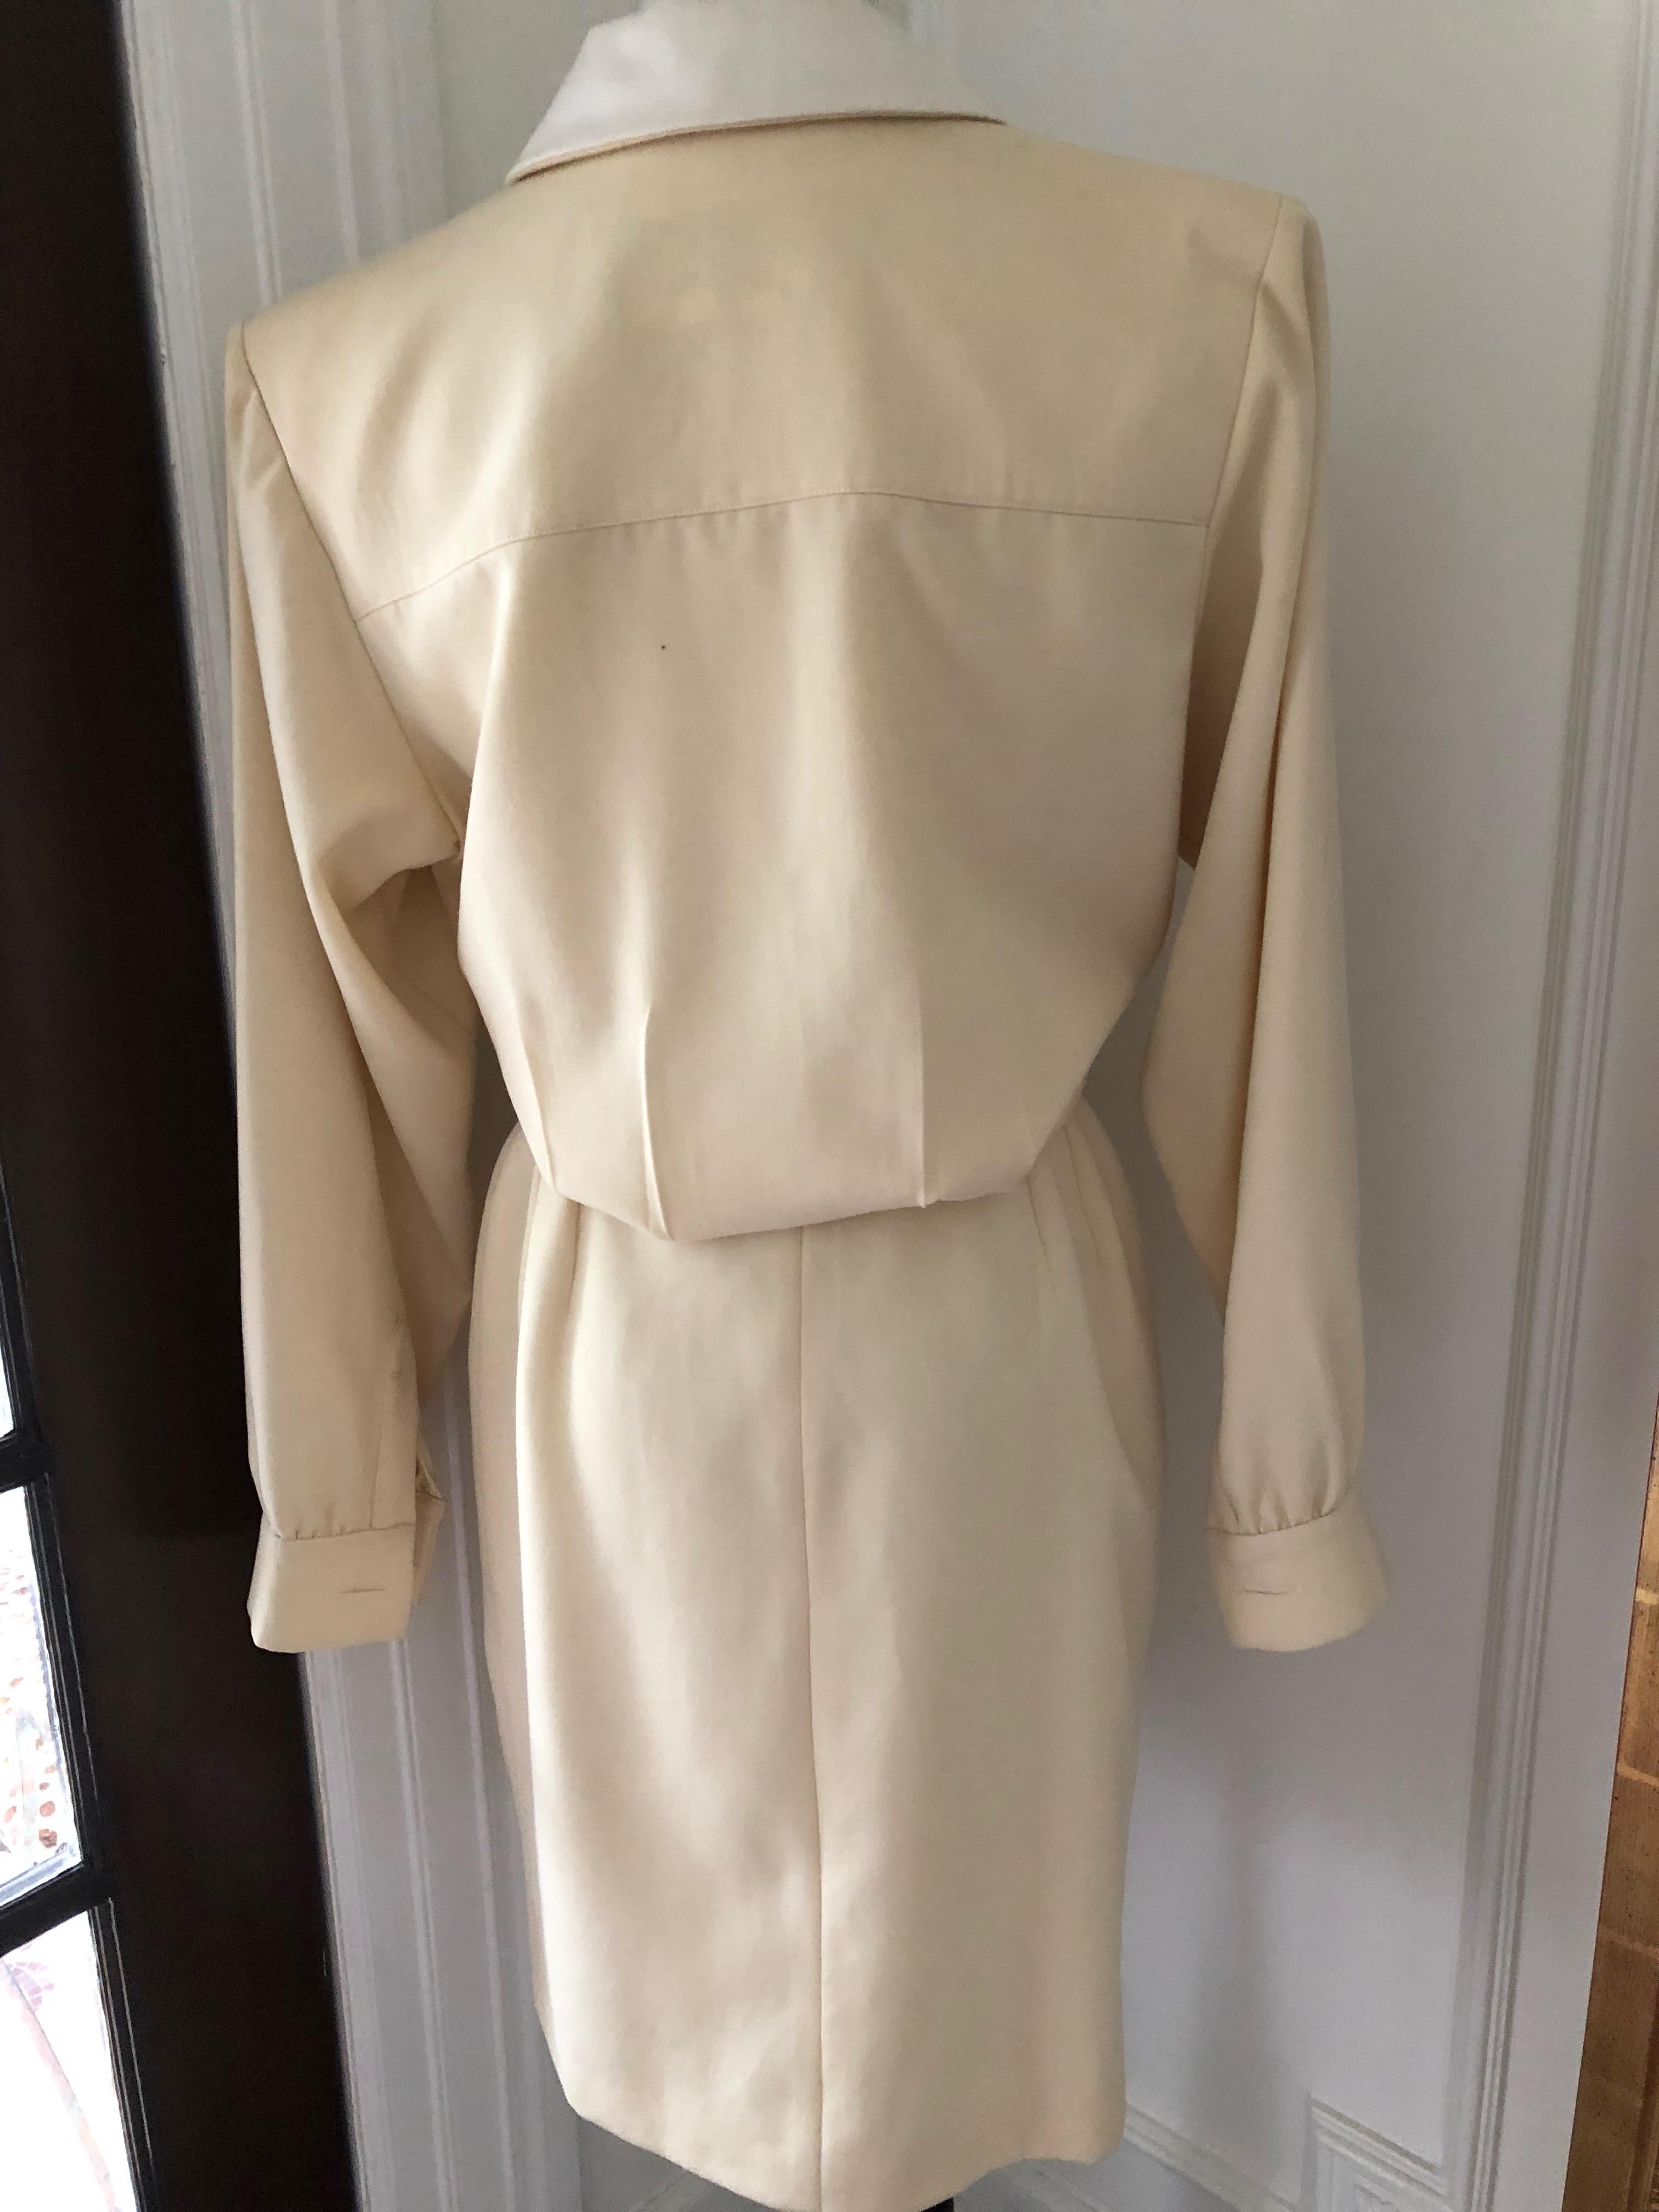 Vintage Yves Saint laurent Dress , cream wool with satin collar and embellished buttons.
Cuff sleeves.
Front closure buttons, but skirt part has a hidden zipper as shown on photo.
Exact content and size is missing.
Estimated size Small.